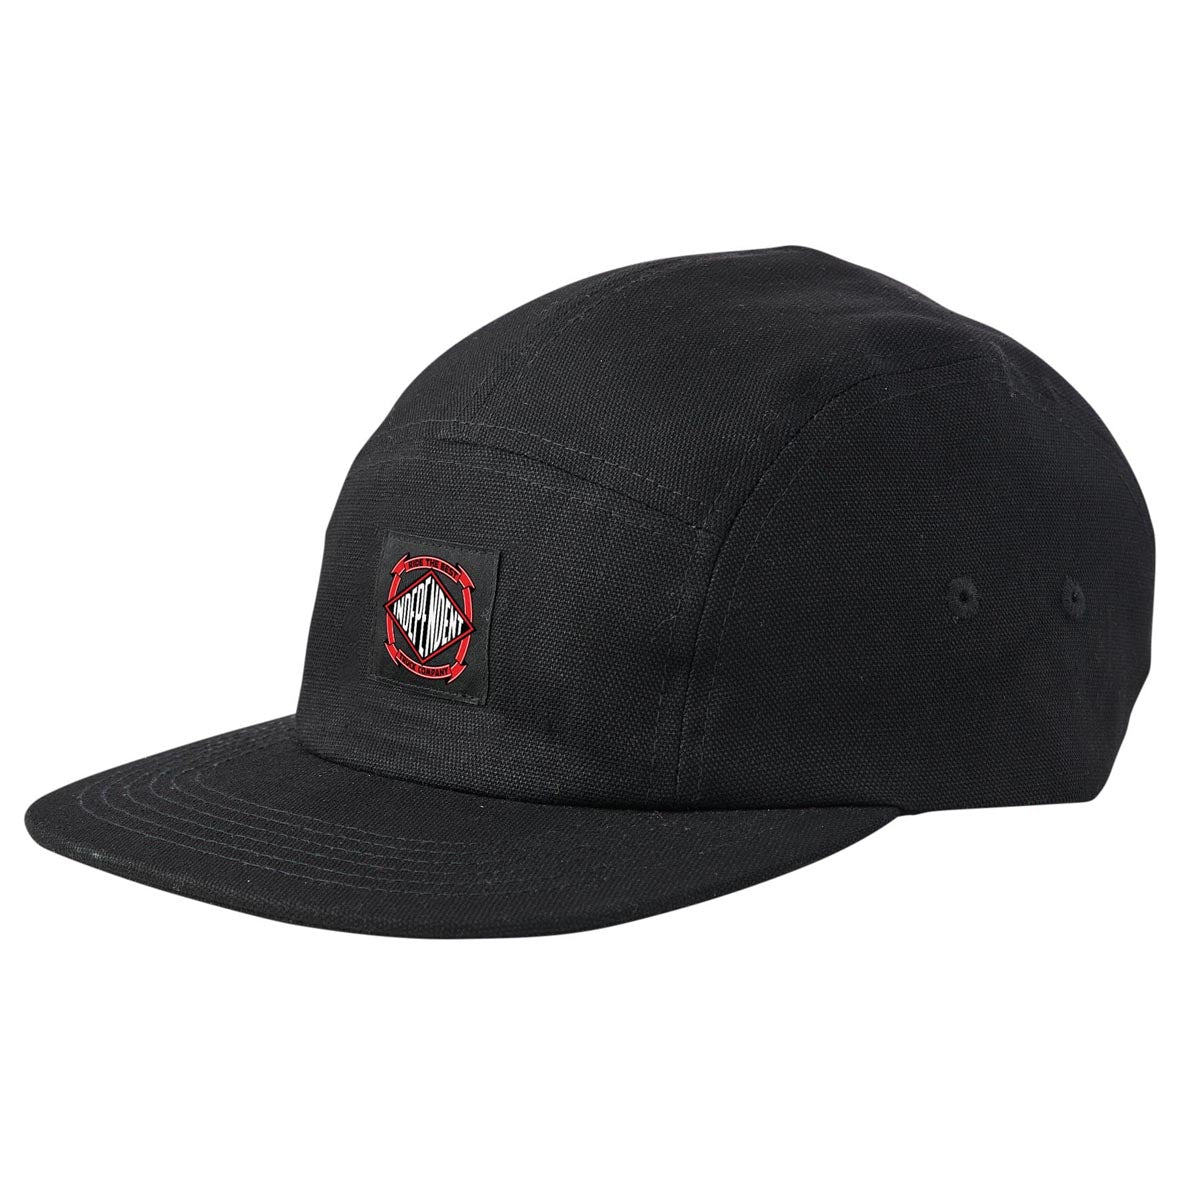 Independent Summit Scroll Camp Unstructured Hat - Black image 1